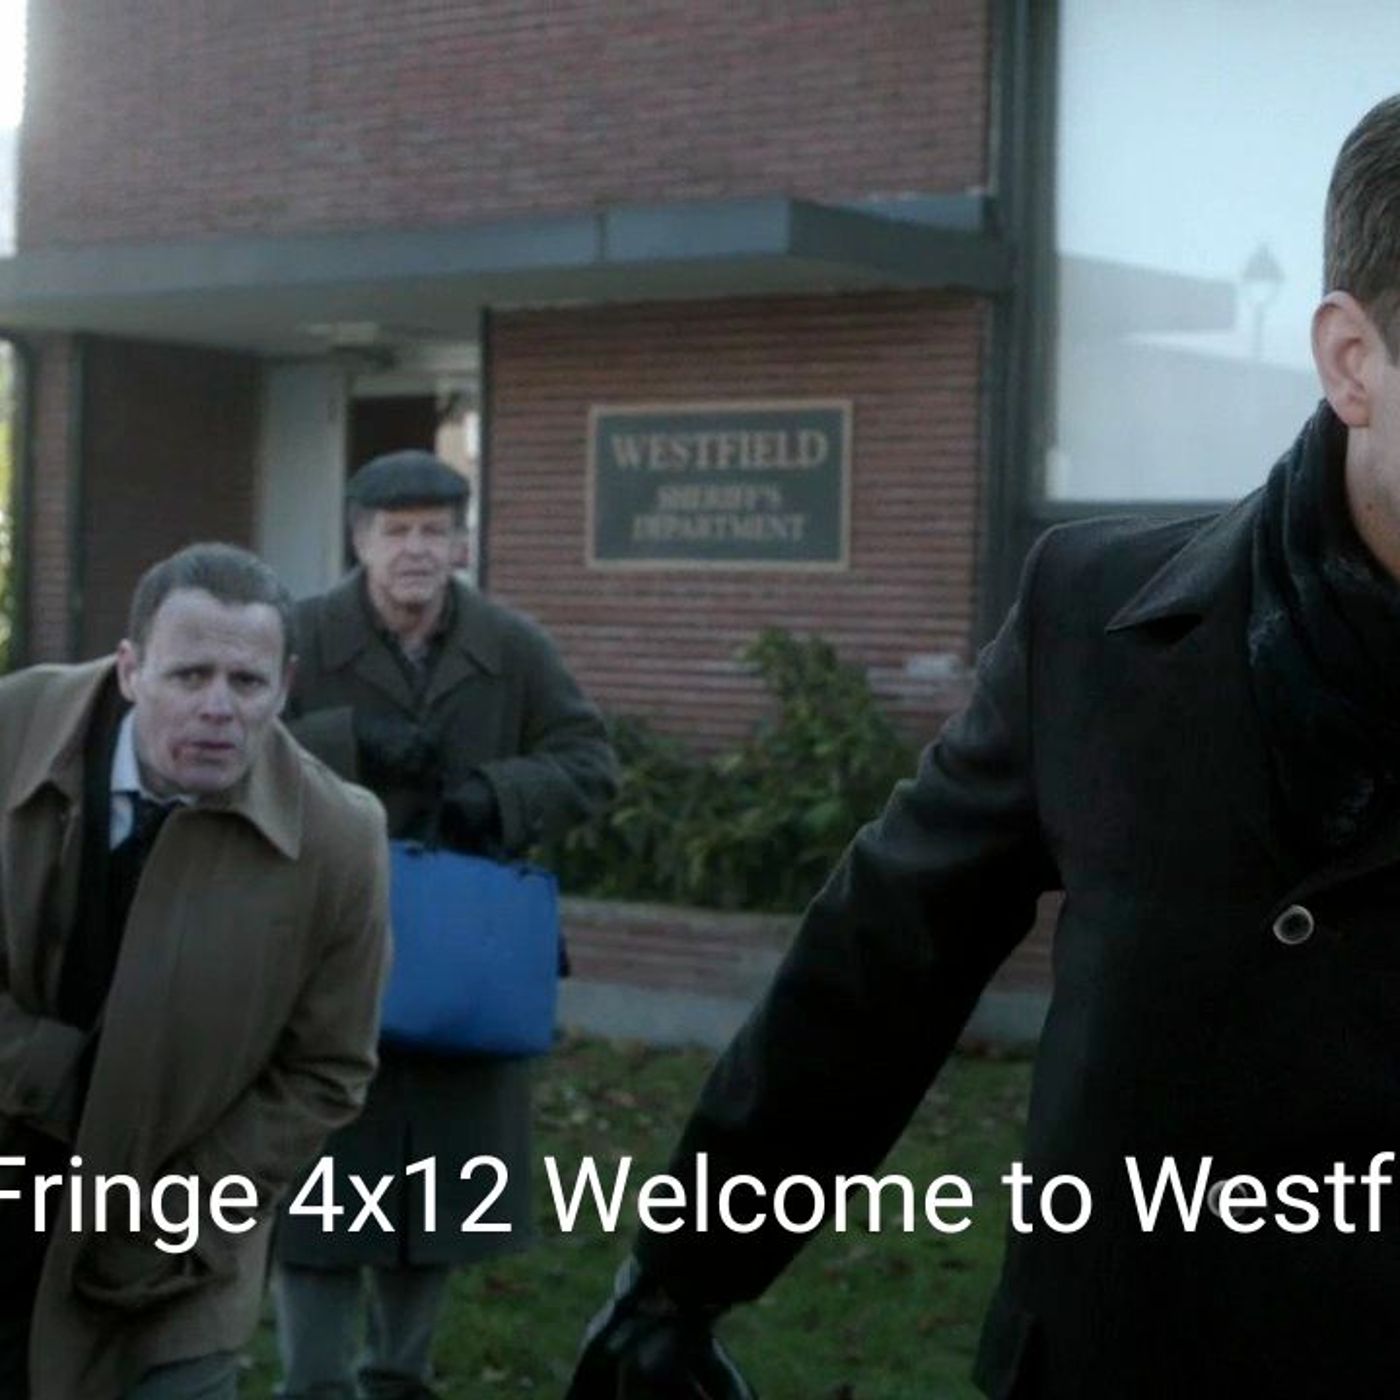 Fringe 4x12: Welcome to Westfield